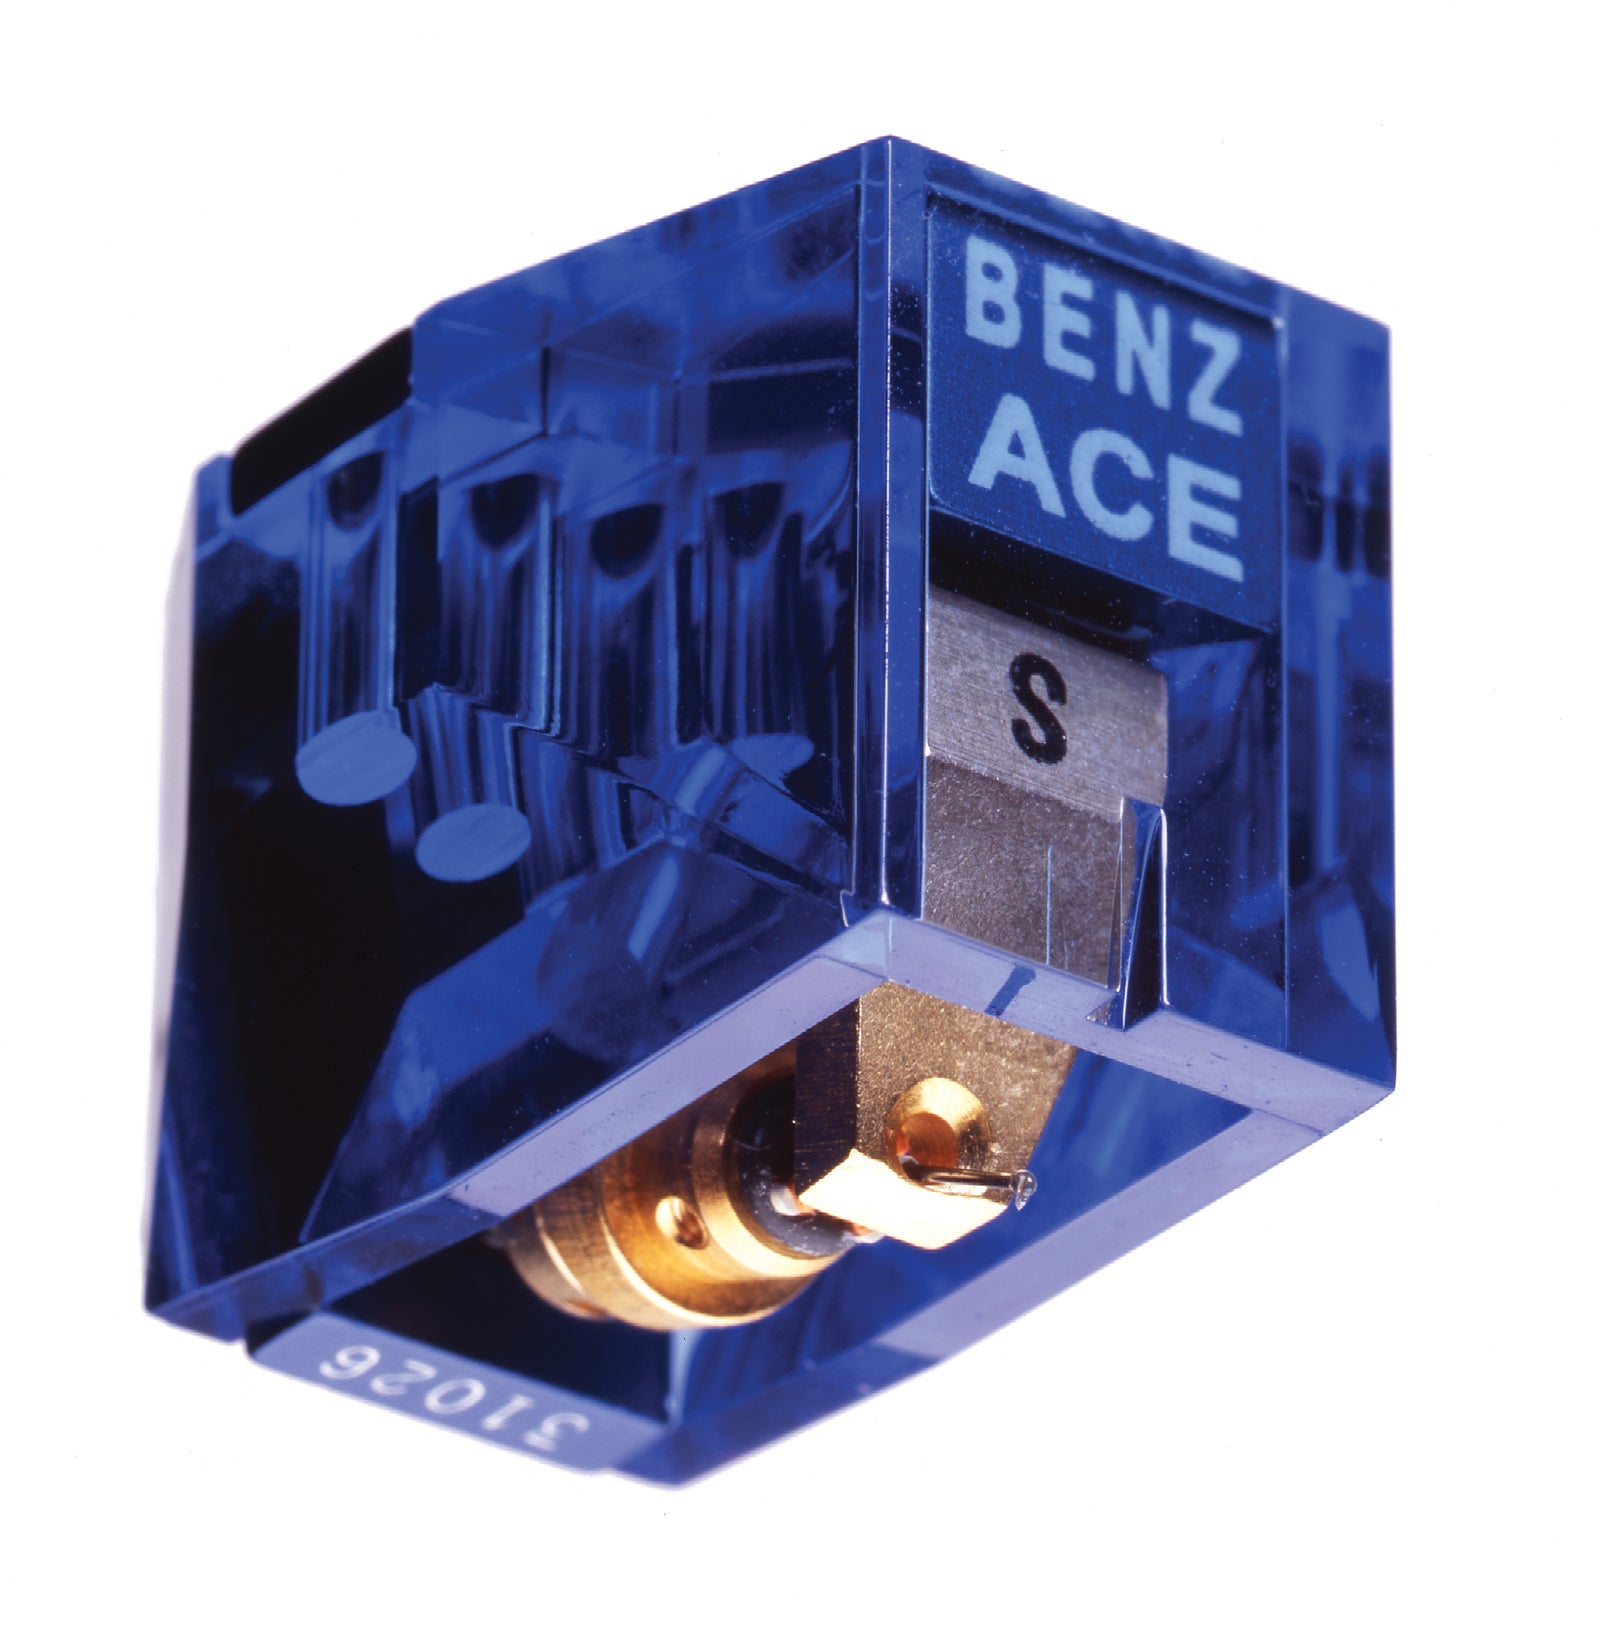 BENZ MICRO ACE SH HIGH OUTPUT CARTRIDGE available at Vinyl Sound: Benz Micro LP - LP-S - Ebony TR - Benz Micro Ebony Low Output - Ebony Medium Output - Ebony Medium High Output - Ruby ZL - Ruby ZH - Gullwing SLR - Ruby SHR - Wood SL - Wood SM - Wood SH - Reference SL – Glider SL - Glider SM – Glider SH– Ace SL Low Output – Ace SM Medium Output - Benz Micro Ace SH High Output - Benz Micro MC Gold - MC Silver – Lukaschek PPI-Phonostage – Benz Micro ABCD –1Aesthetix